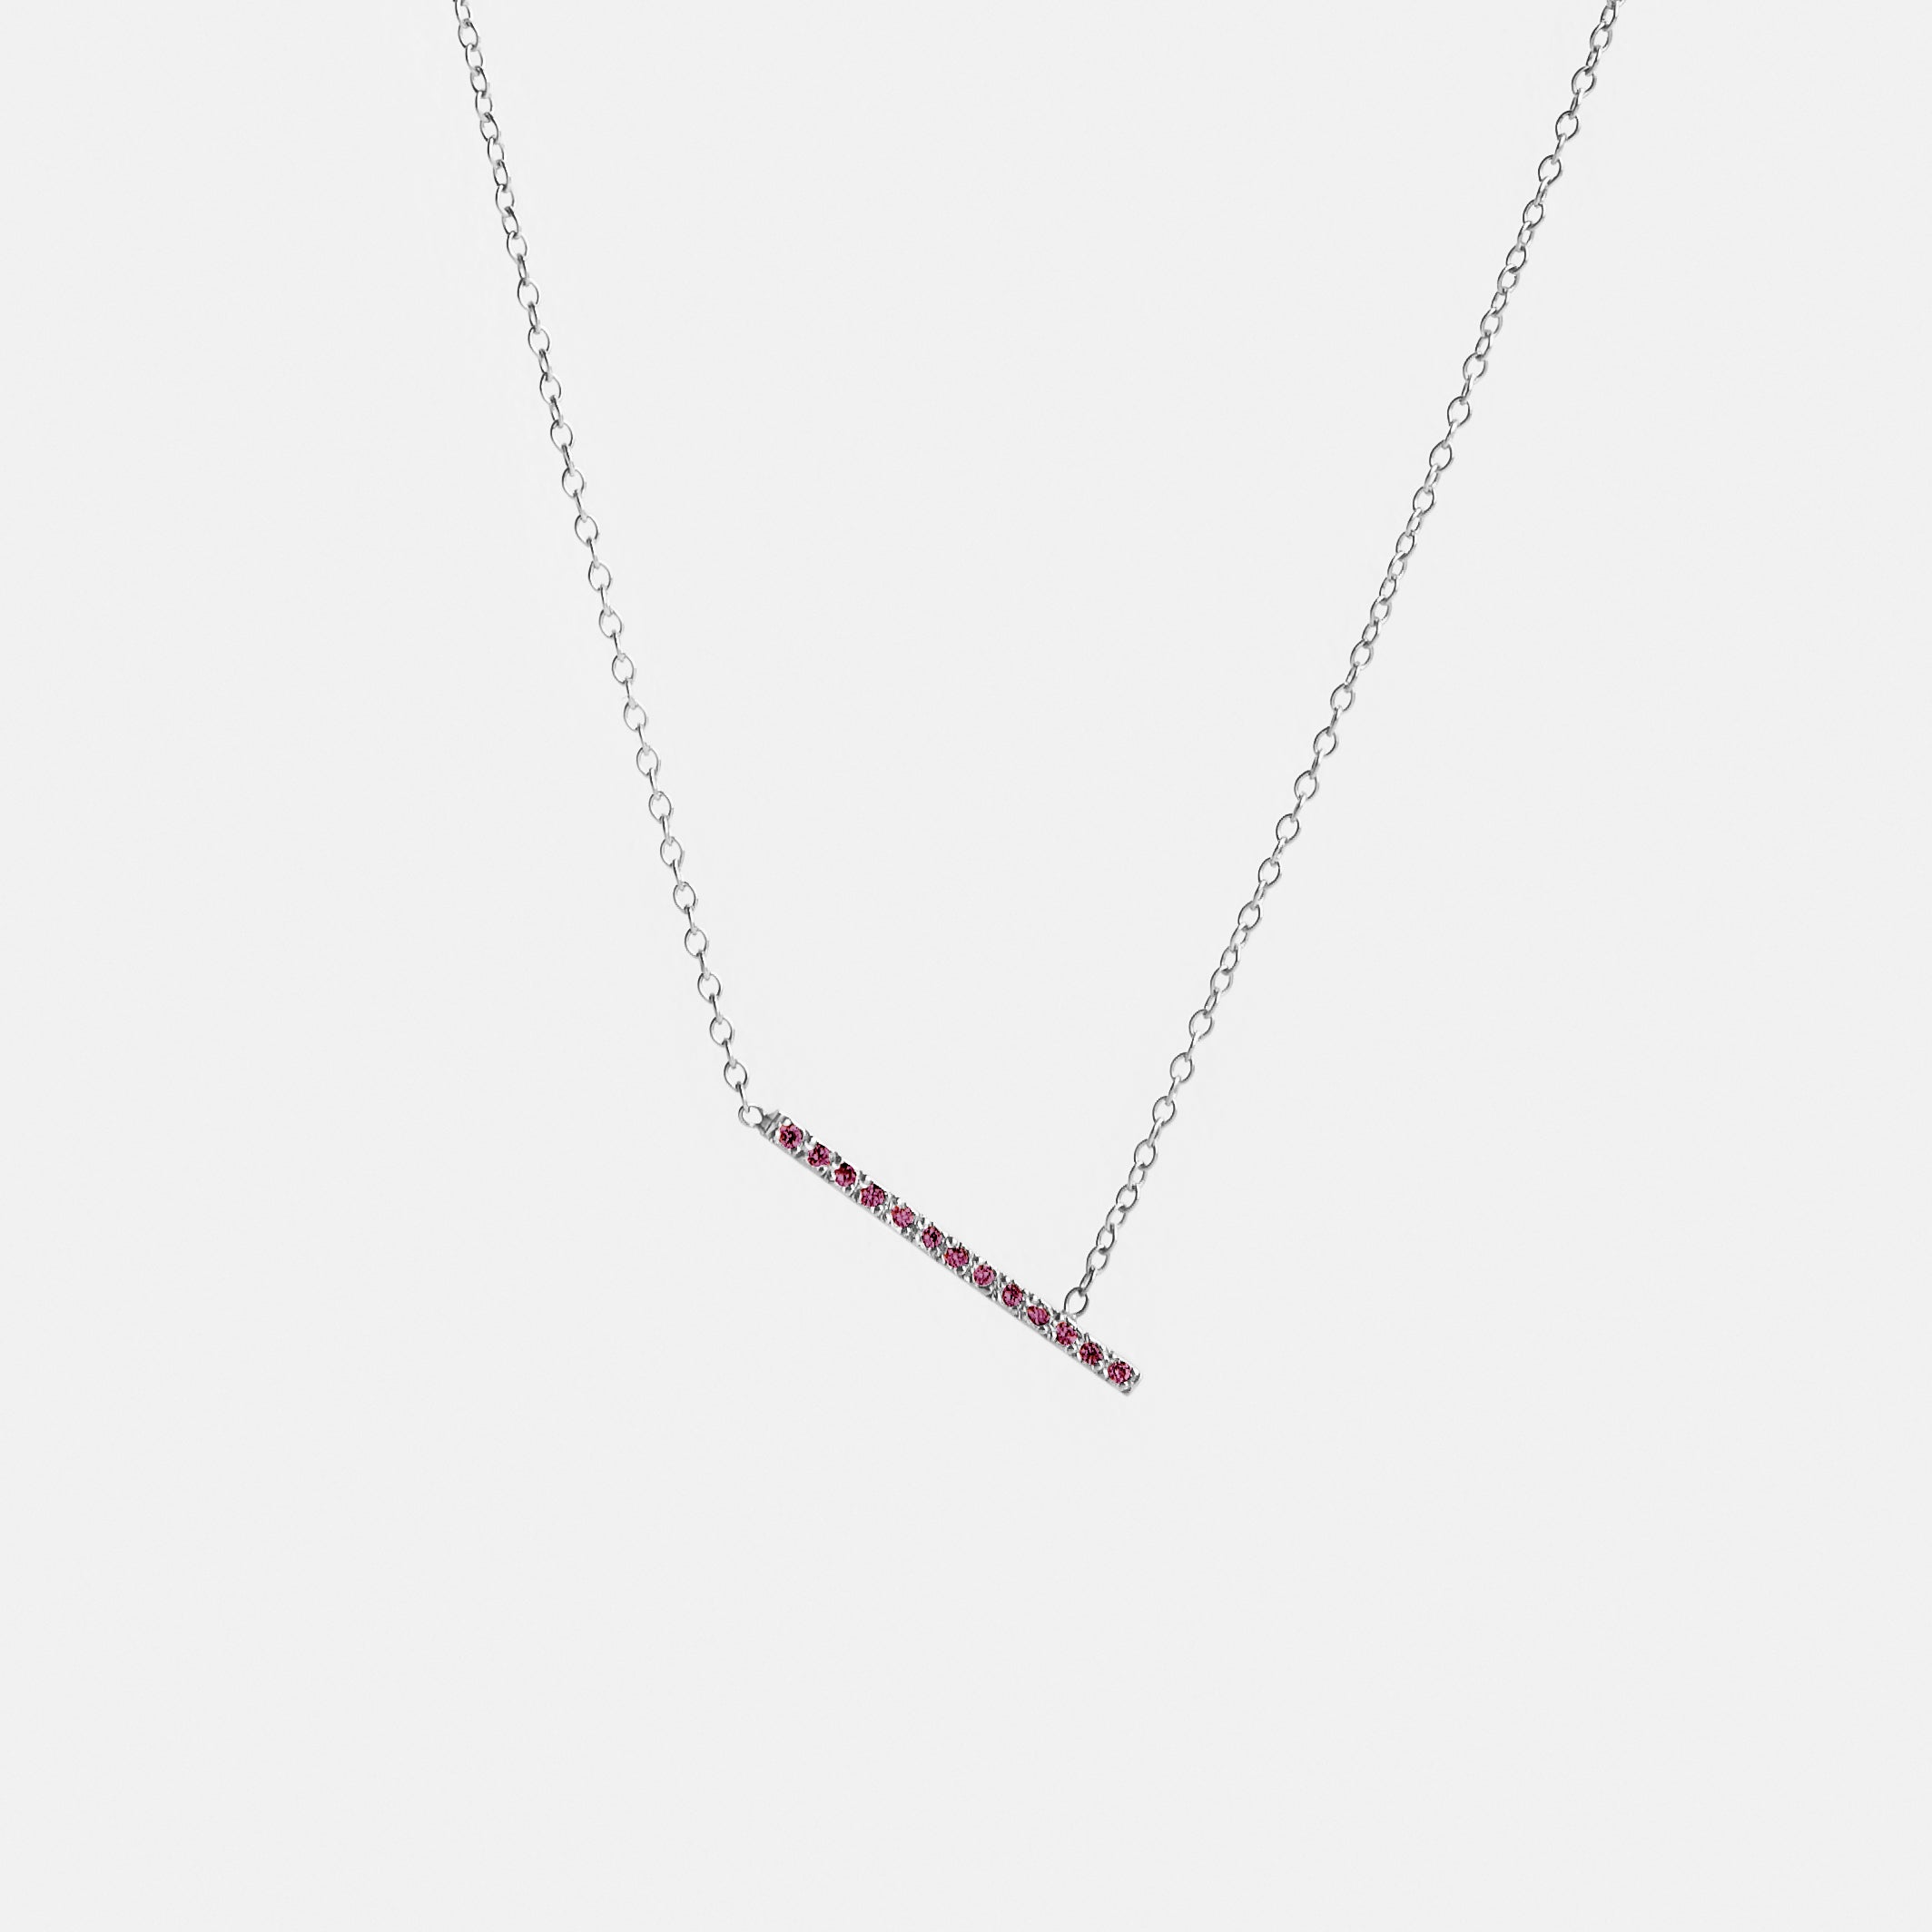 Tira Unconventional Necklace in 14k White Gold set with Rubies By SHW Fine Jewelry NYC